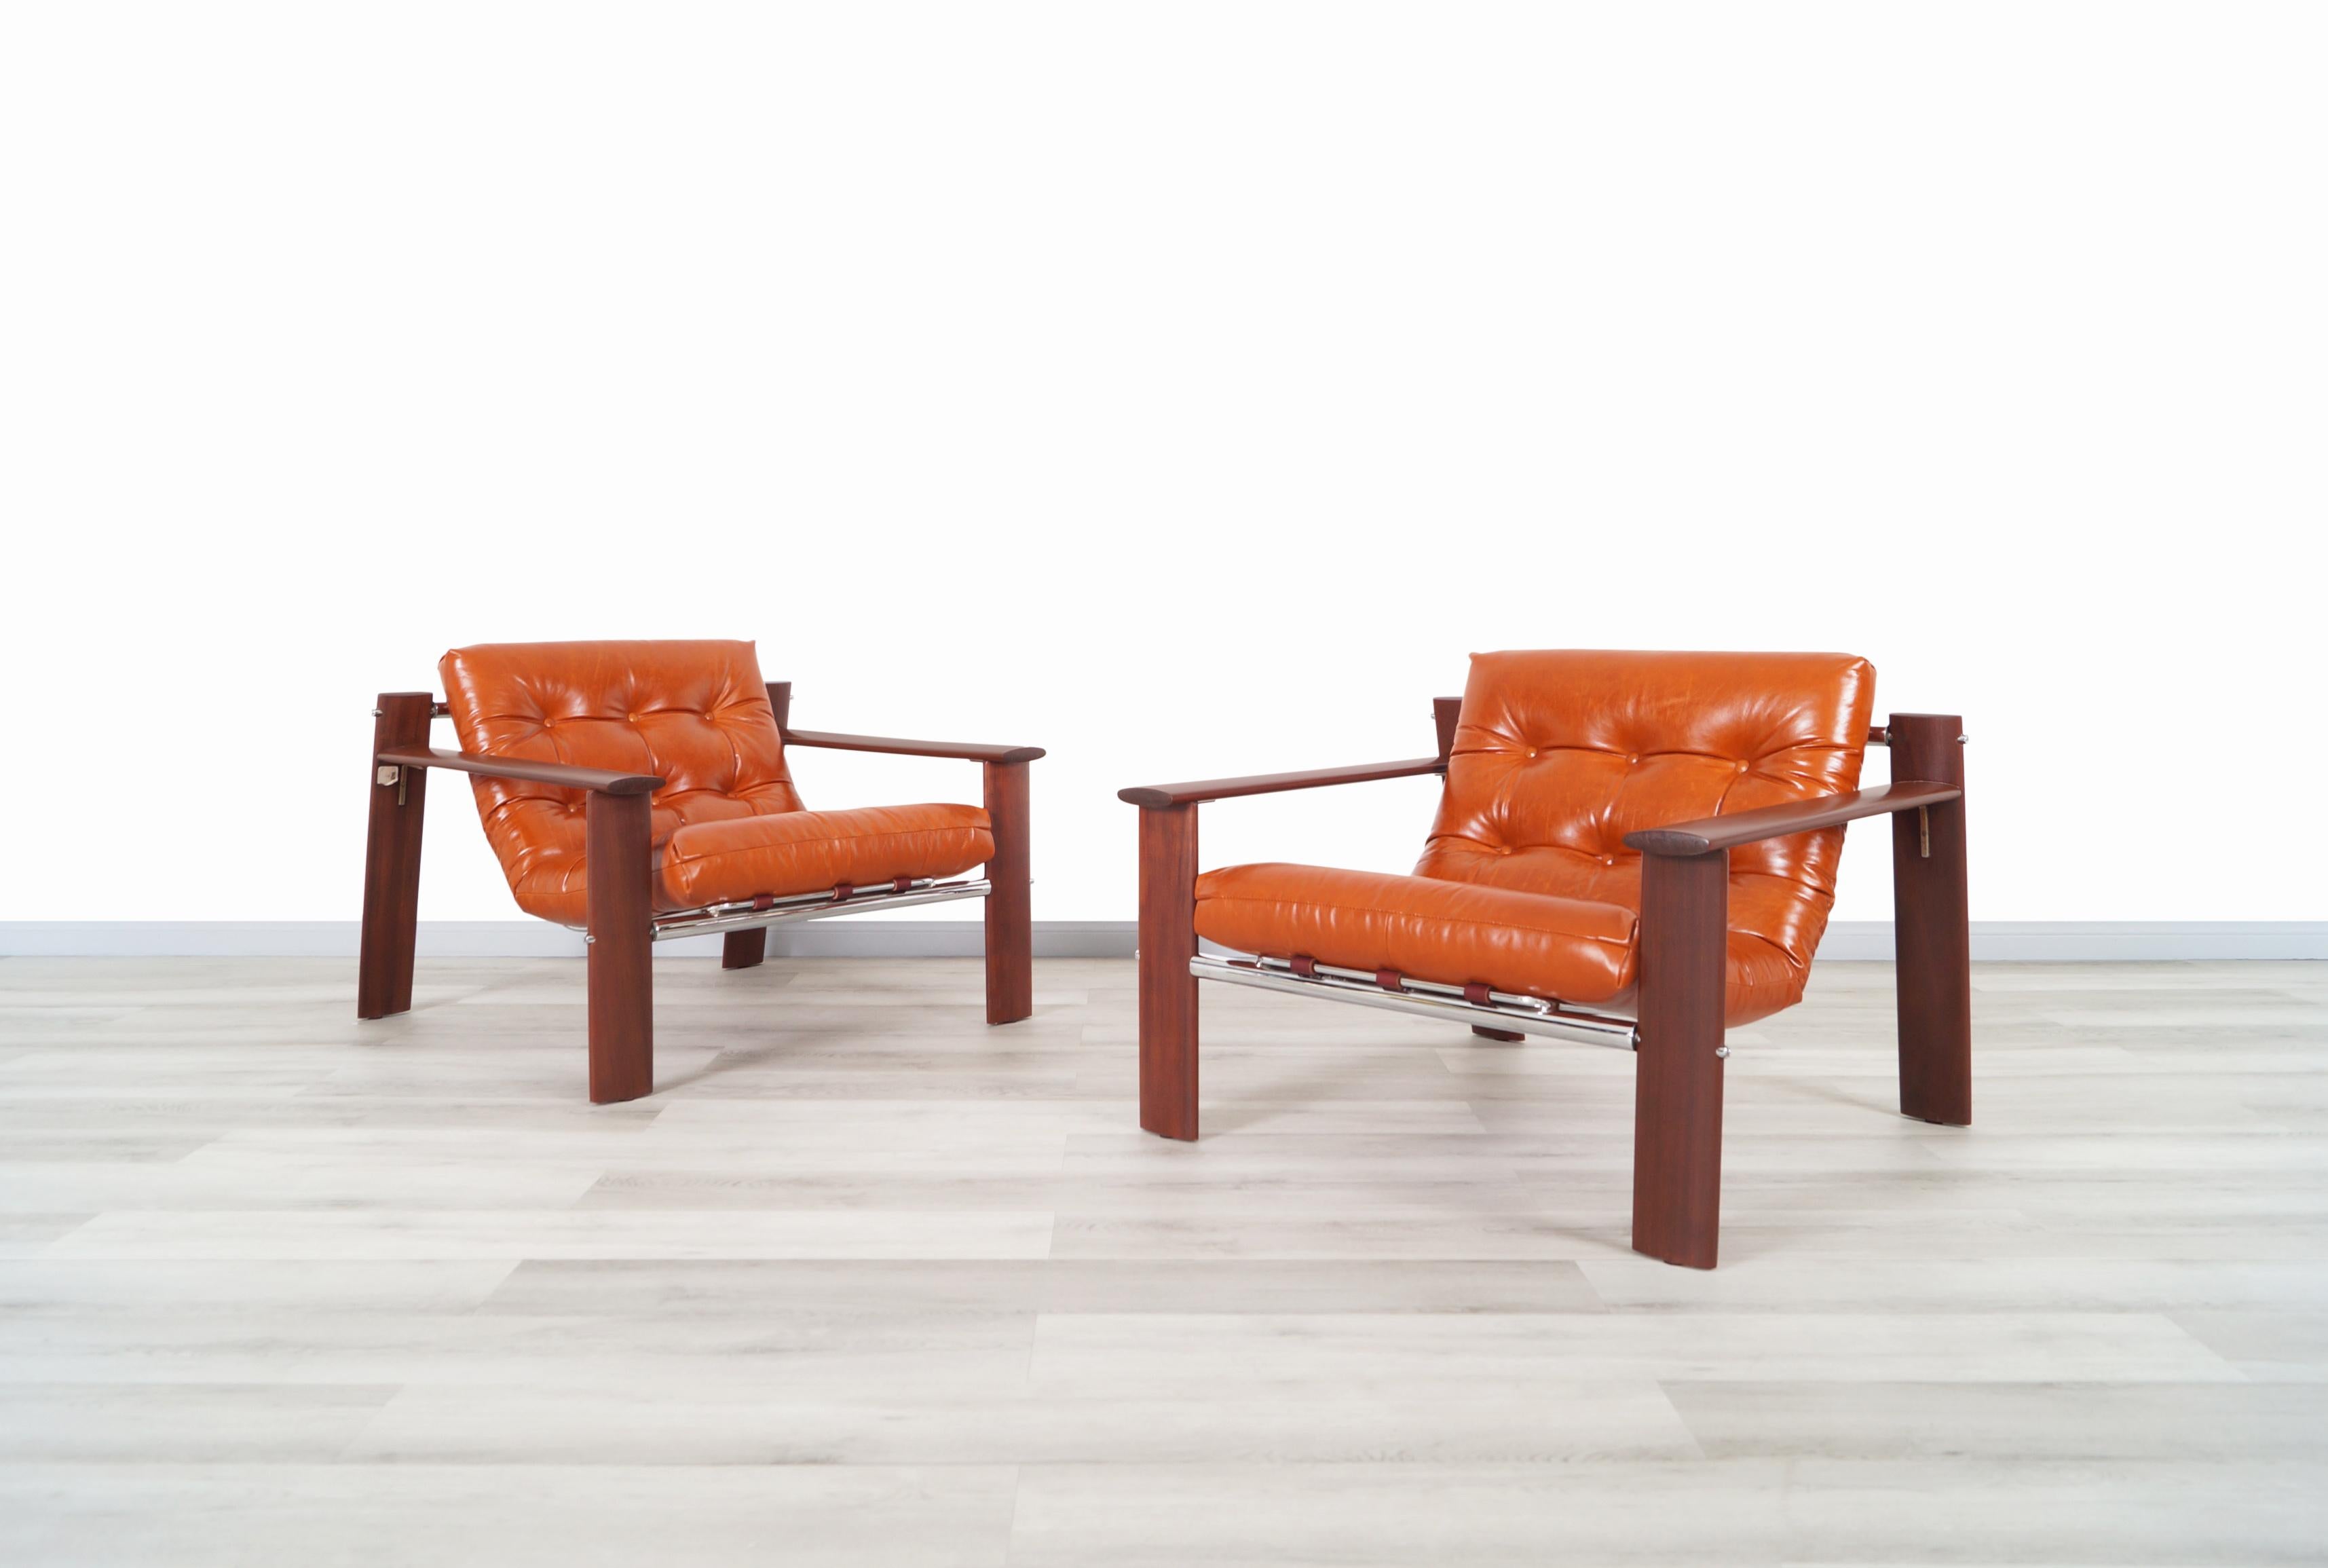 Visually stunning pair of rare vintage MP-129 lounge chairs designed by architect and furniture designer Percival Lafer from Brazil. These phenomenal chairs are simply amazing! Features a sculptural and exotic Jacaranda wood frame native from